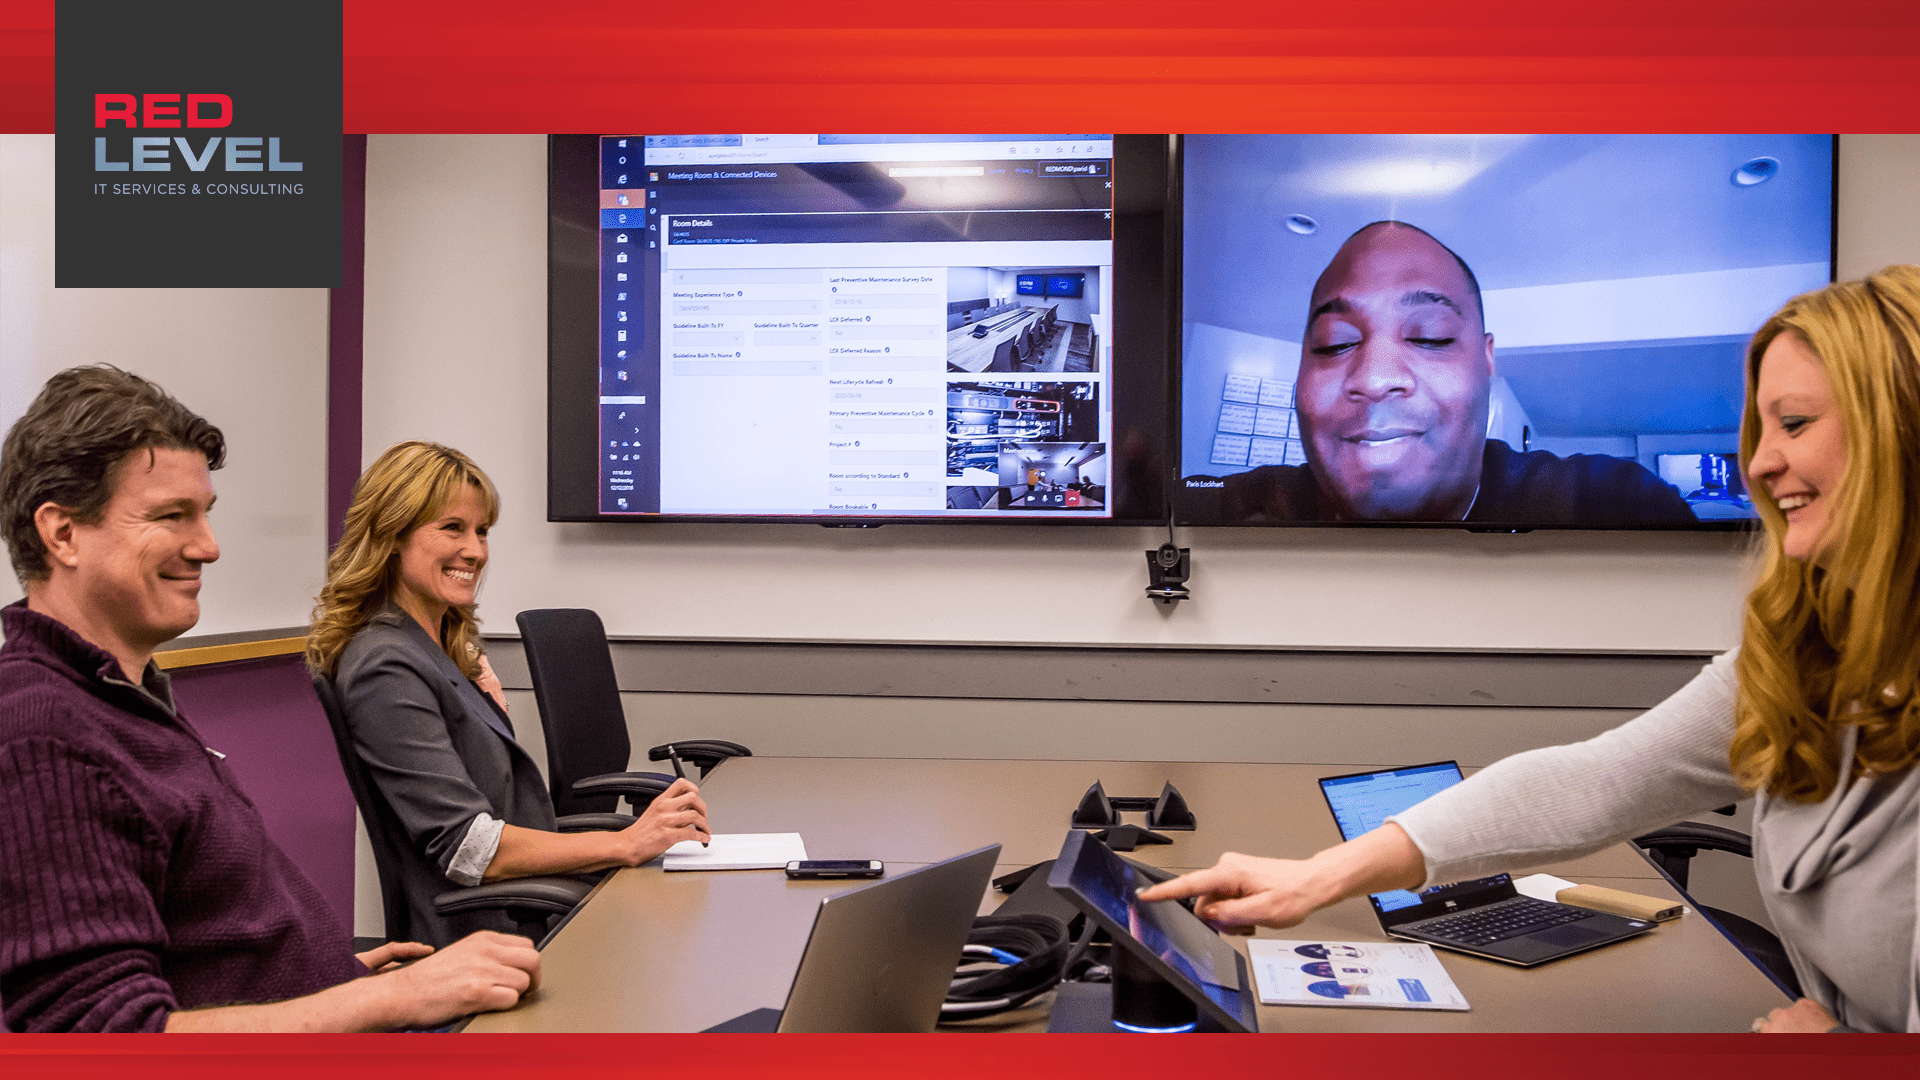 smiling people in a conference room talking to someone on a screen displaying a hybrid workplace